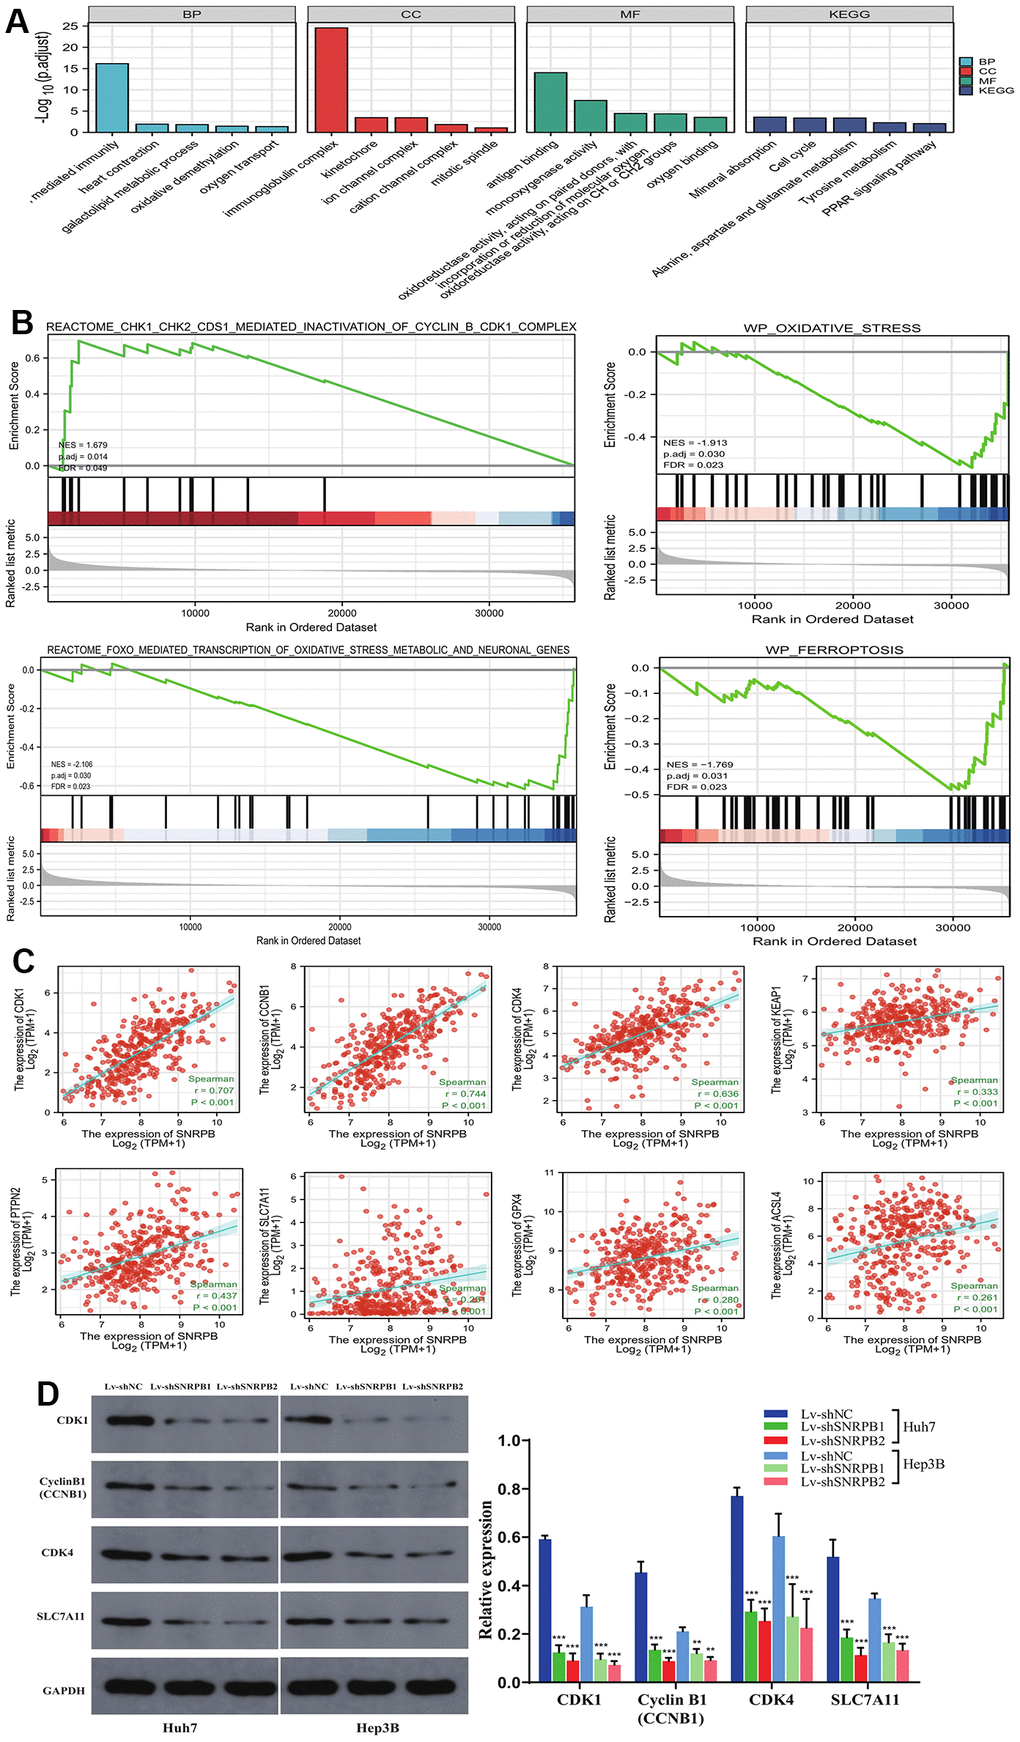 SNRPB knockdown affects the expression of downstream genes associated with cell cycle, oxidative stress and ferroptosis. (A) GO-KEGG of DEGs. (B) GSEA of the TCGA dataset: the high SNRPB expression associated DGEs are enriched in cell cycle related genes and that low SNRPB expression associated DGEs are enriched in oxidative stress and ferroptosis related genes. (C) Correlation between SNRPB expression and CDK1, CyclinB1 (CCNB1), CDK4, KEAP1, PTPN2 (TCPTP), SLC7A11, GPX4 and ACSL4 expression. (D) The protein expression levels of CDK1, CyclinB1 (CCNB1), CDK4, and SLC7A11 after SNRPB knockdown were evaluated by Western blotting.